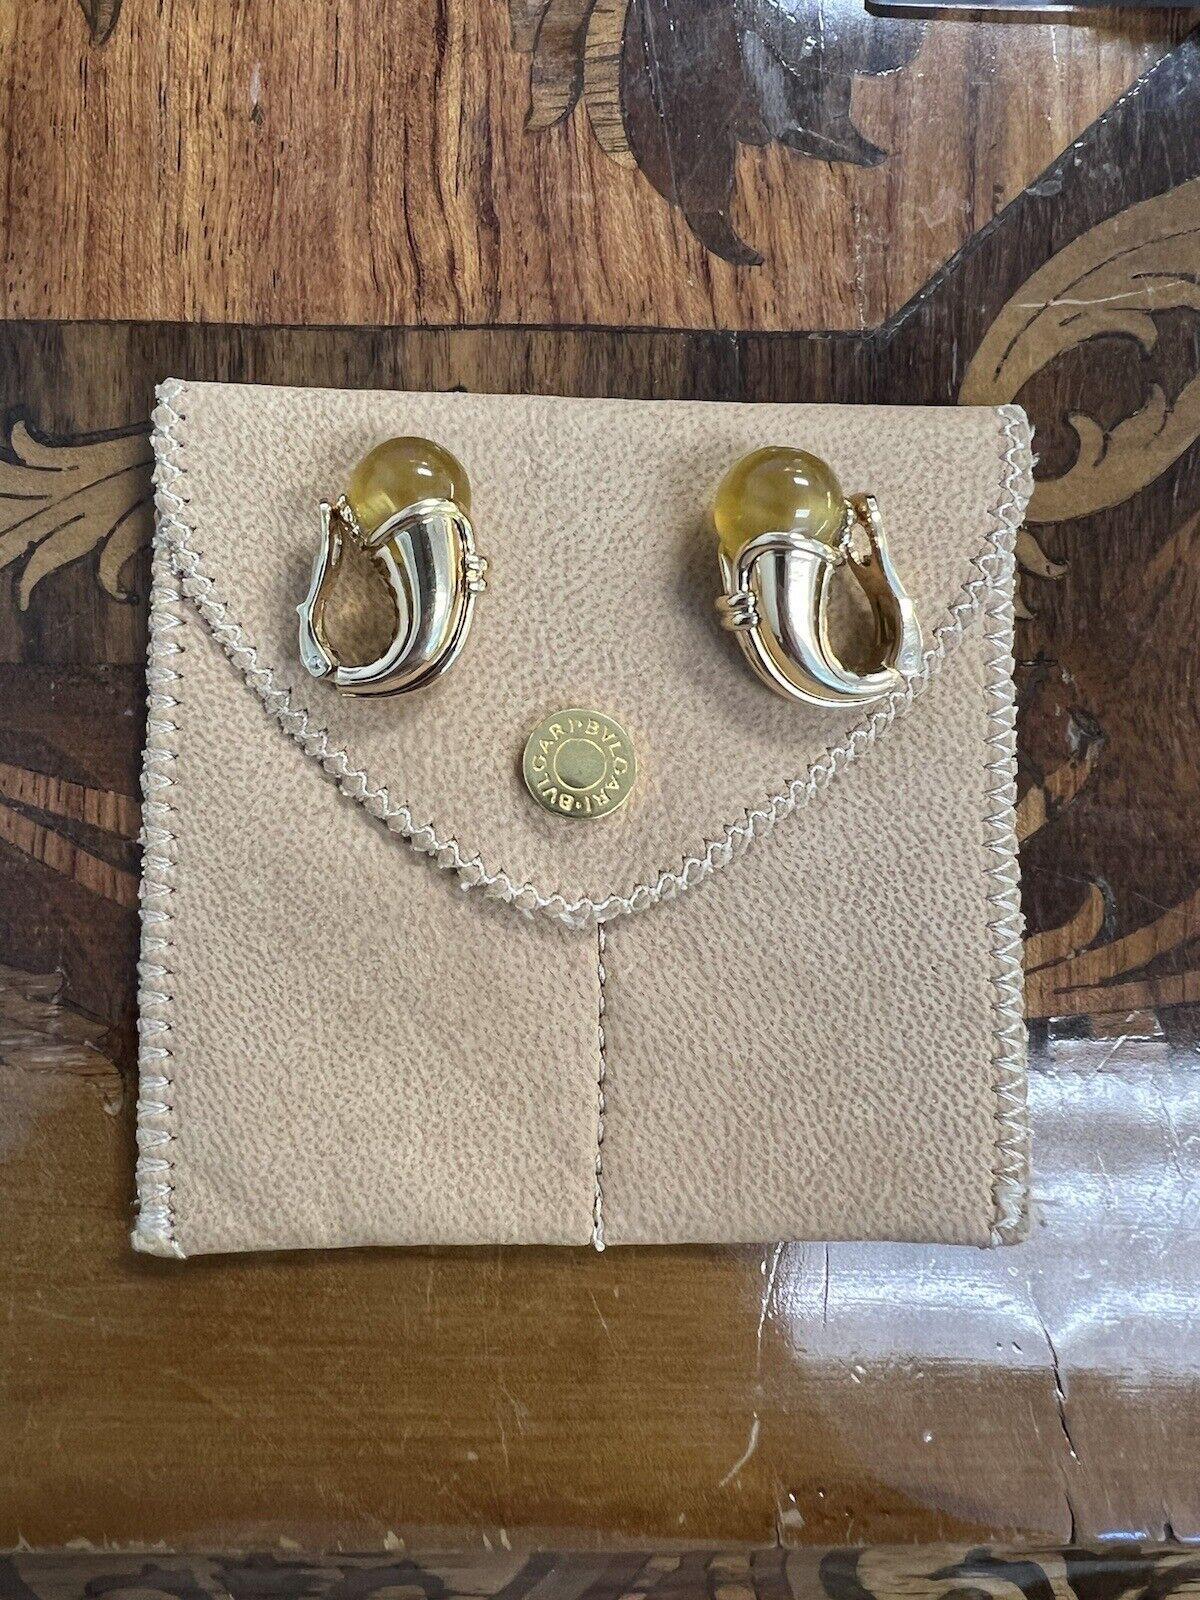 Bvlgari Italy 18k Yellow Gold & Citrine Clip On Earrings Circa 1980s w/Pouch

Here is your chance to purchase a beautiful and highly collectible designer pair of earrings.  

vintage BVLGARI 18k yellow gold yellow gem stone earclip earring
Brand: